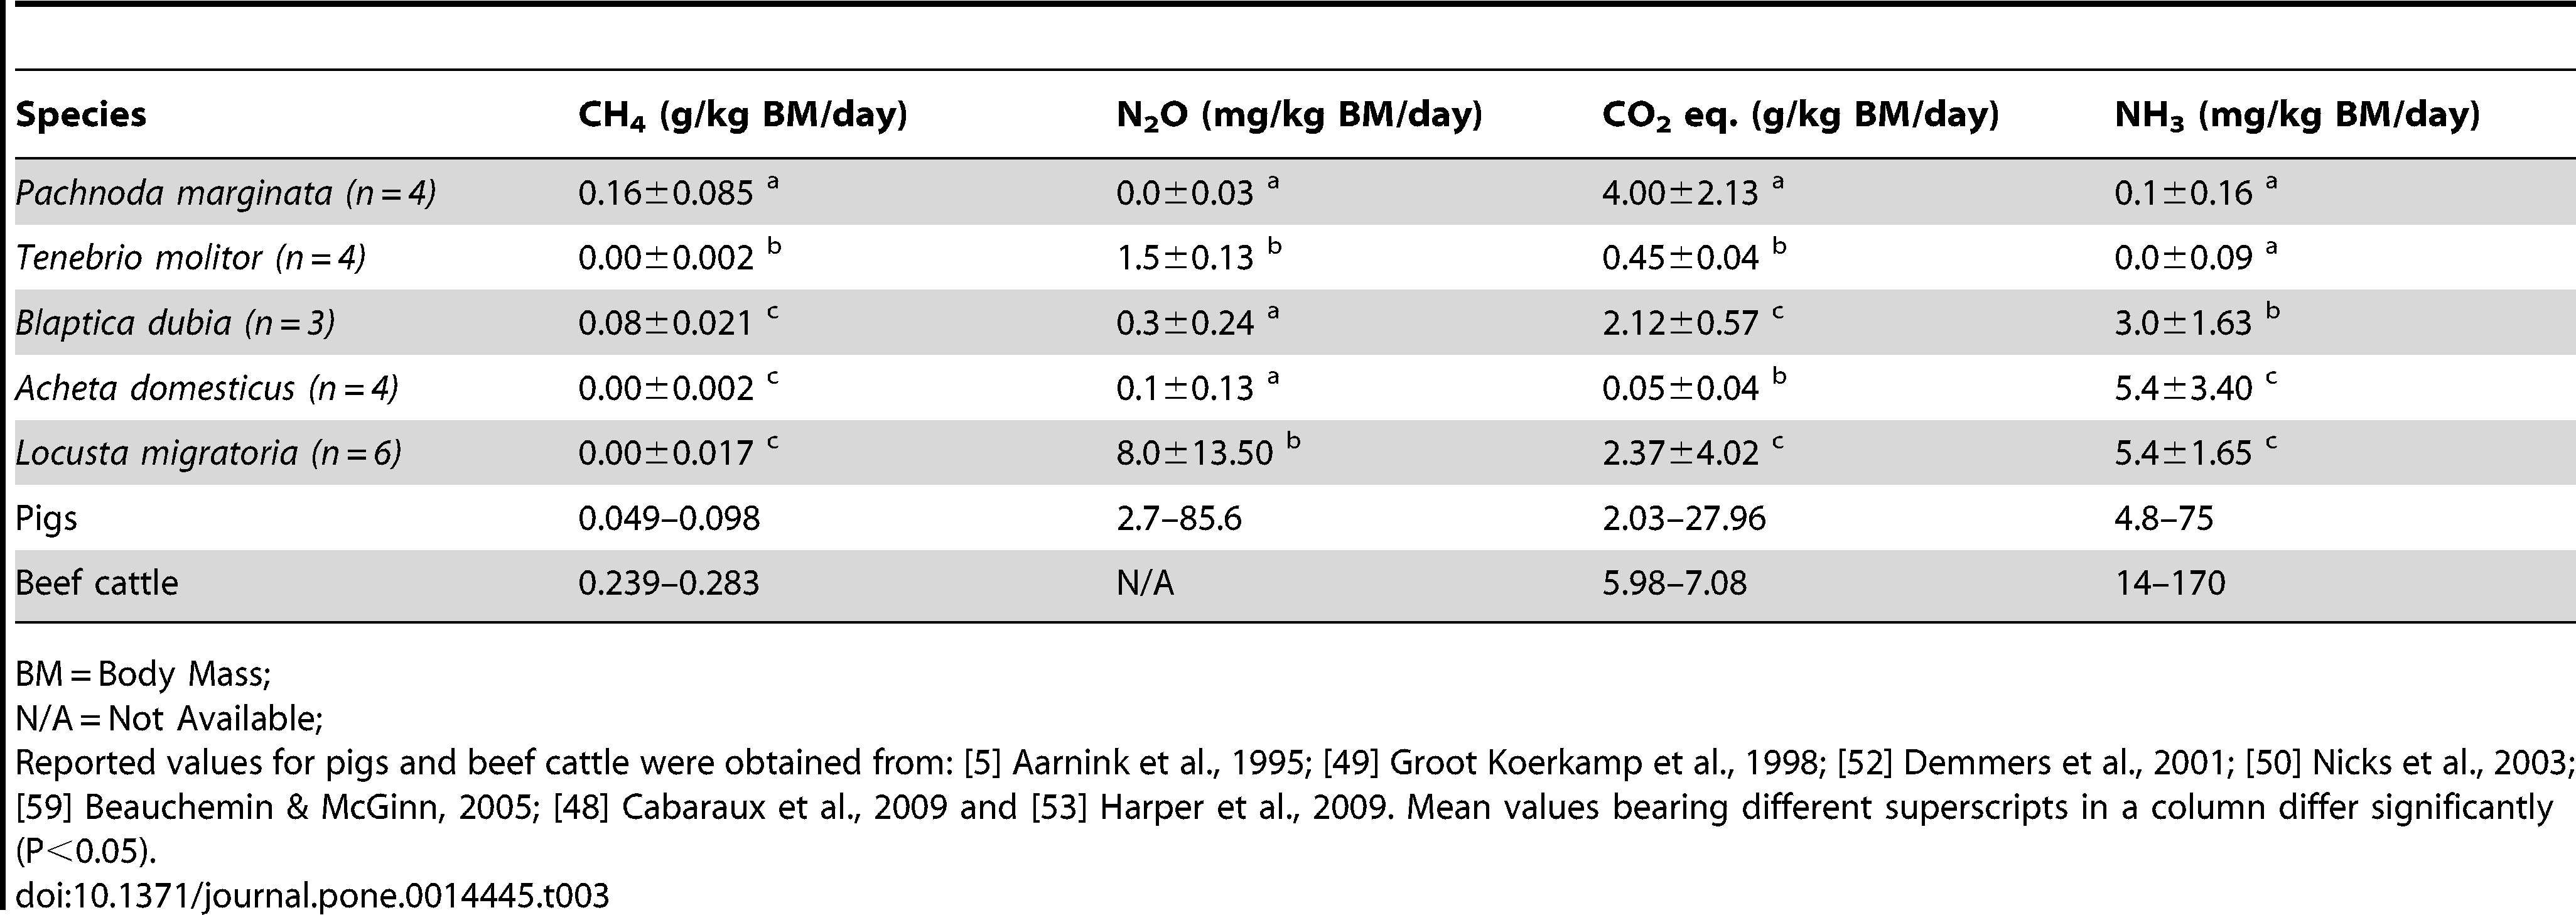 CH4, N2O, CO2 and NH3 production per kilogram of bodymass per day for five insect species, pigs and beef cattle.